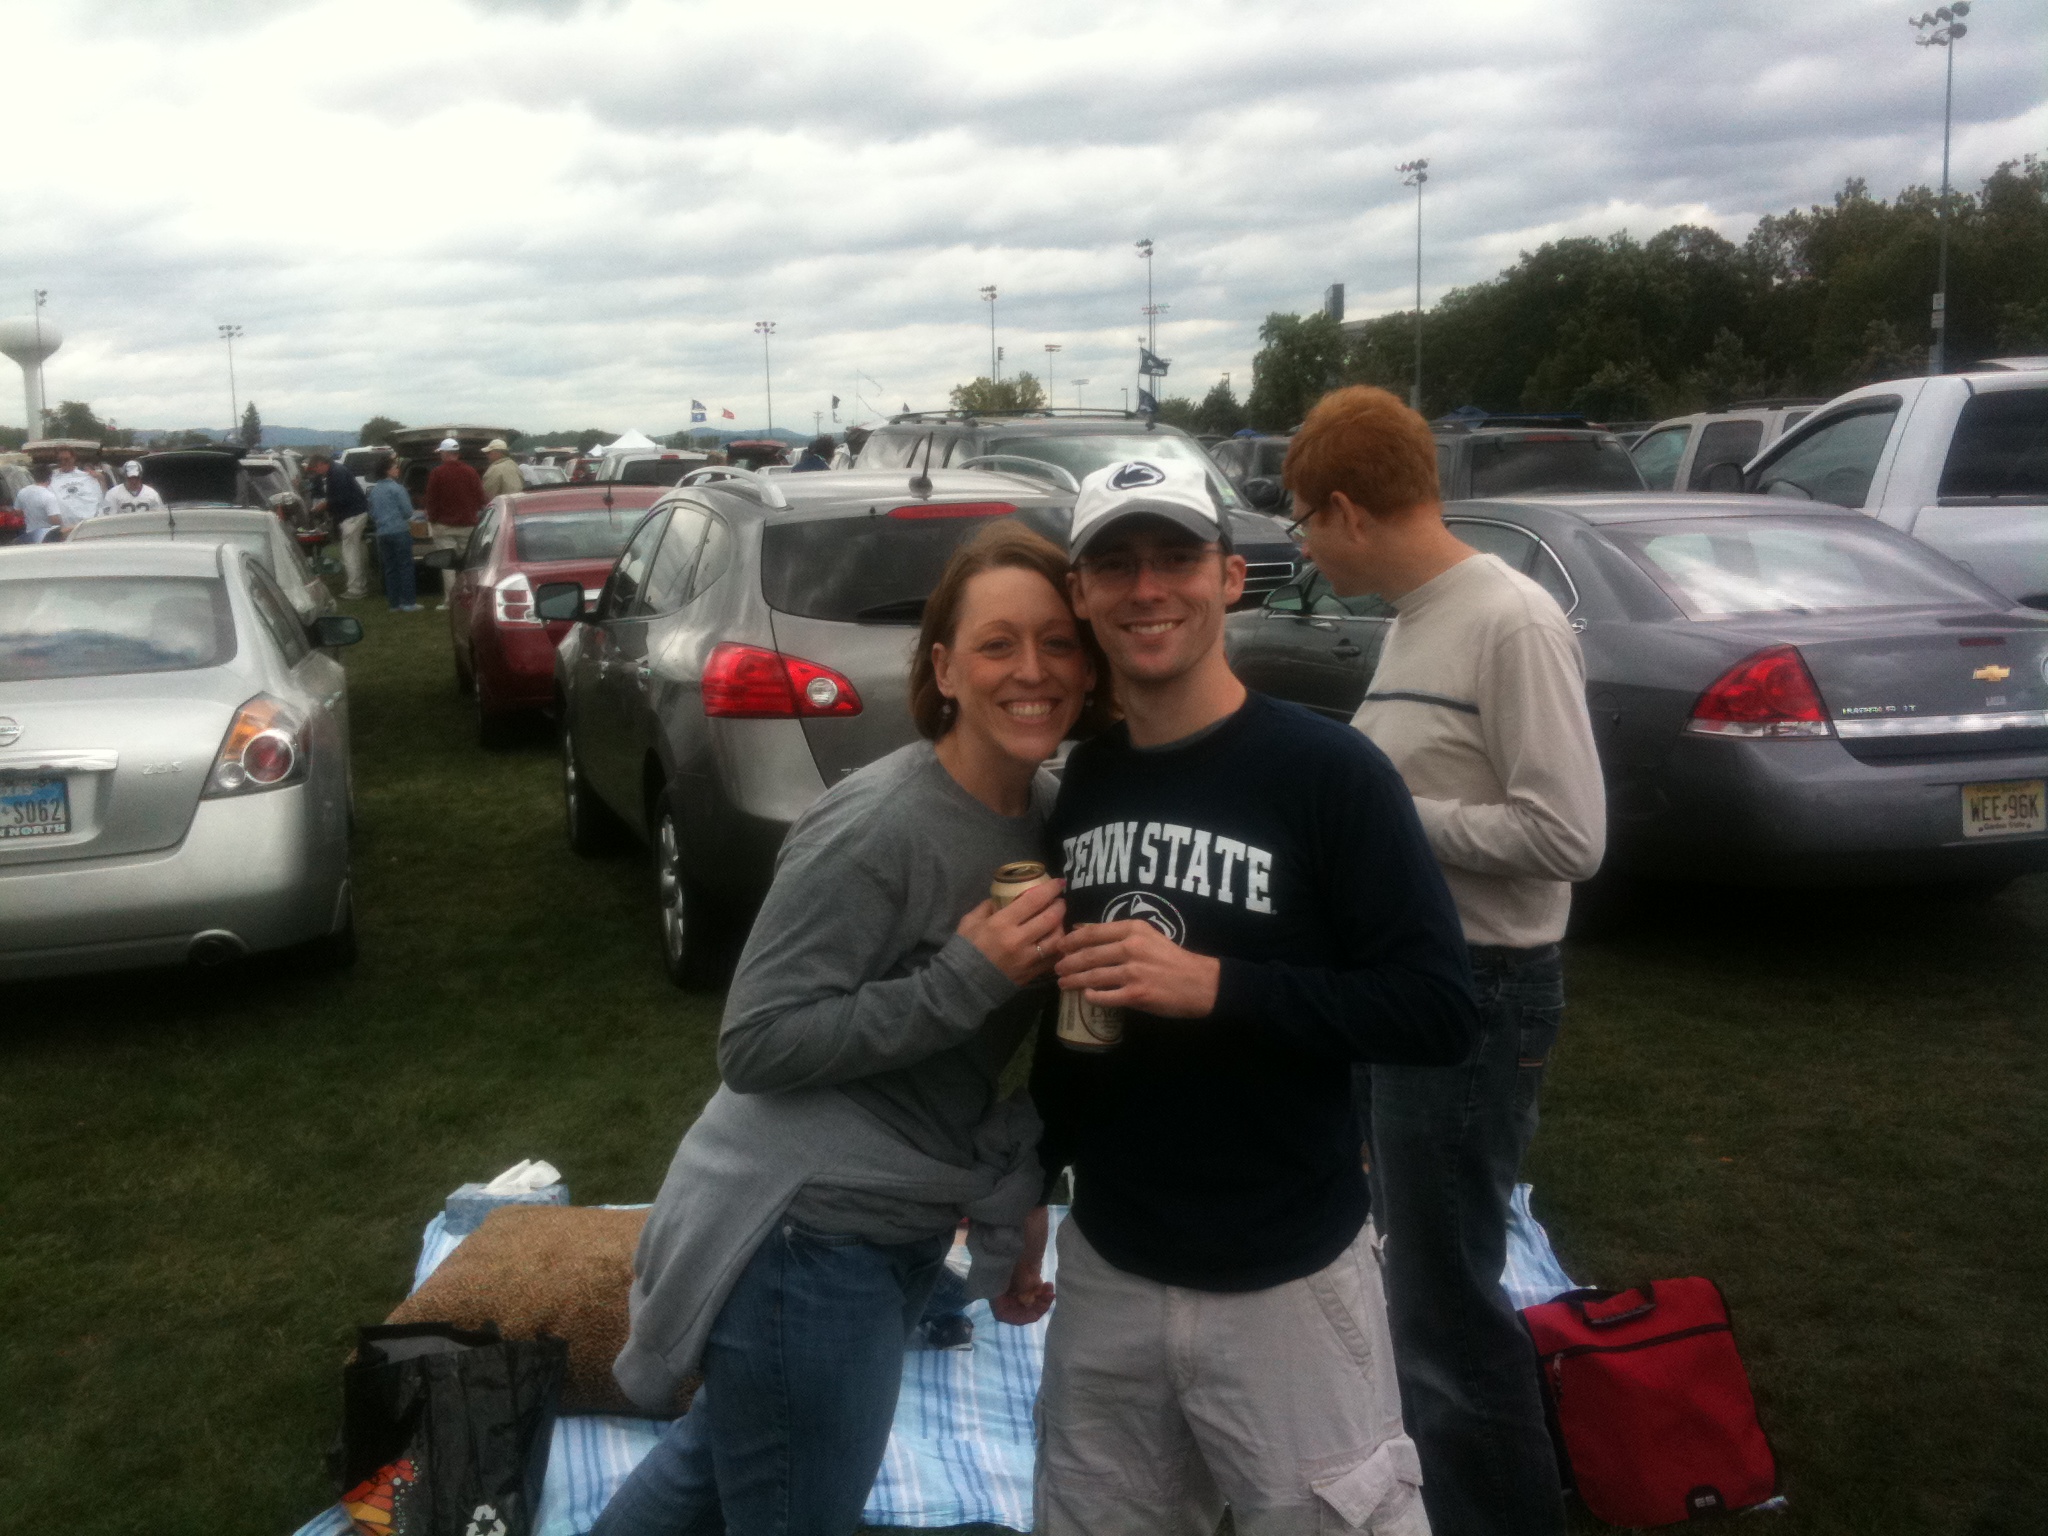 September 4, 2010 PSU vs Youngstown St